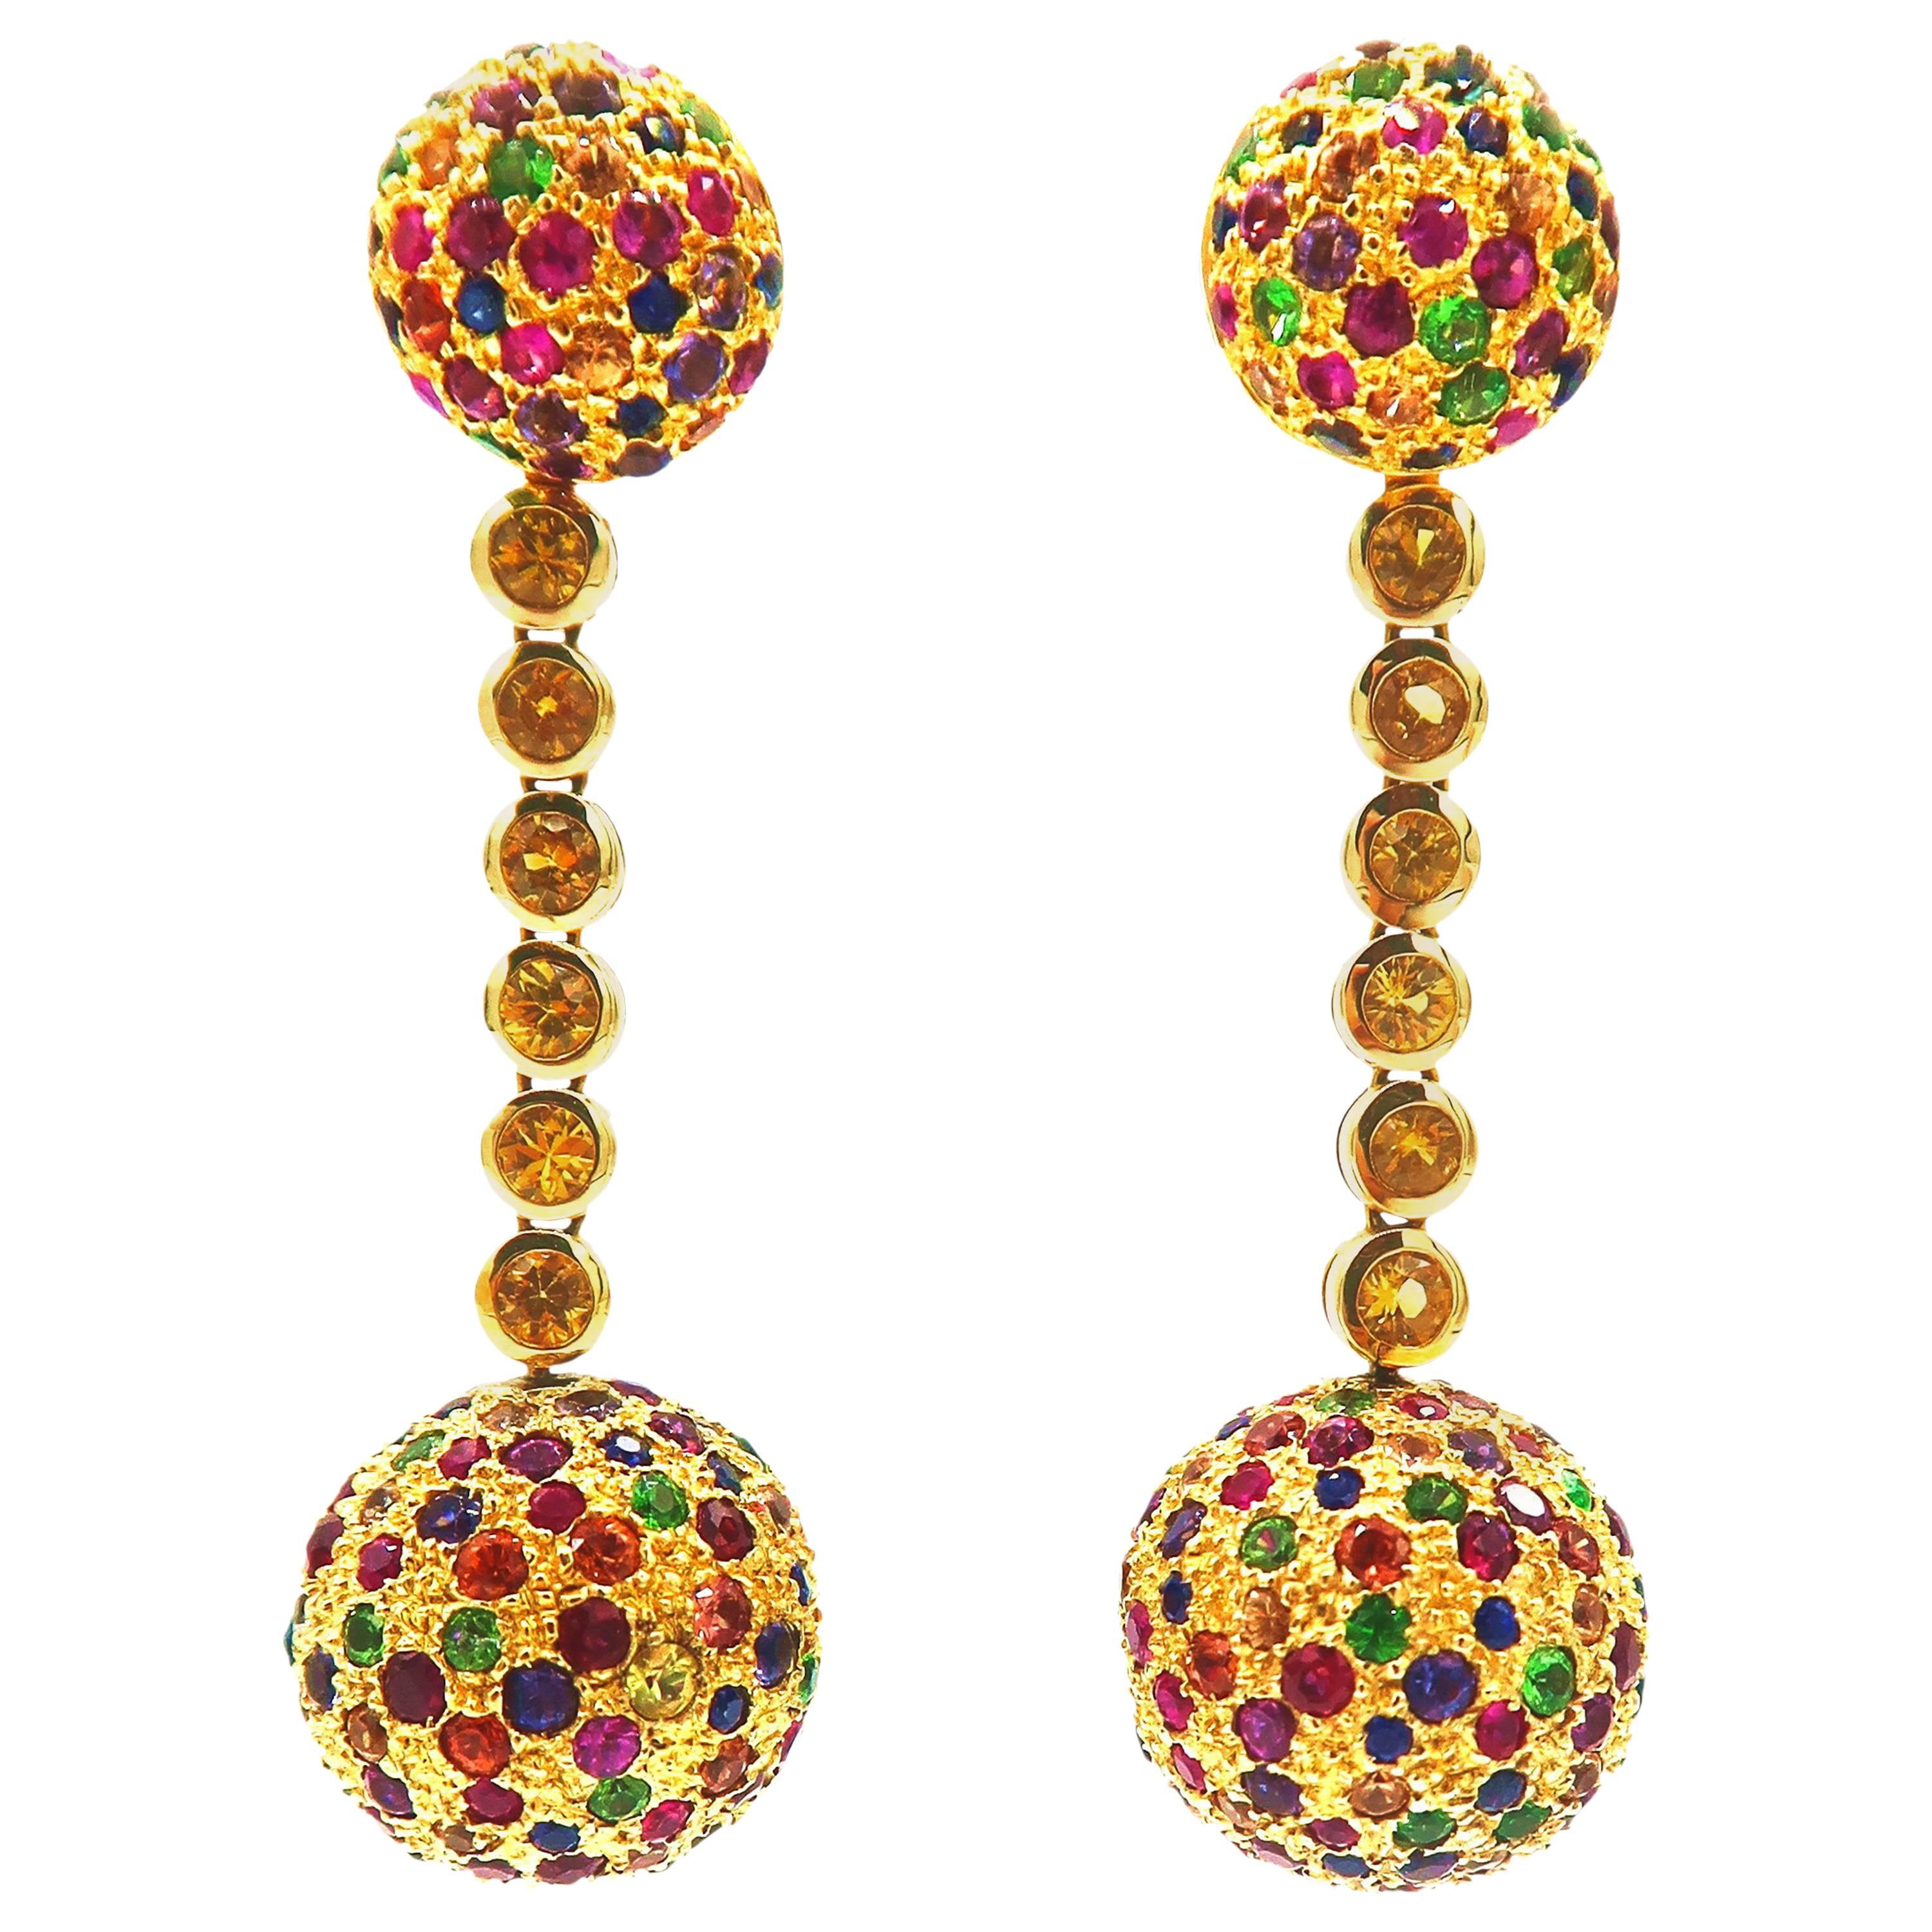 2 in 1 Multicolored Gem Yellow Sapphire Yellow Gold Dangle Ball Earrings Studs